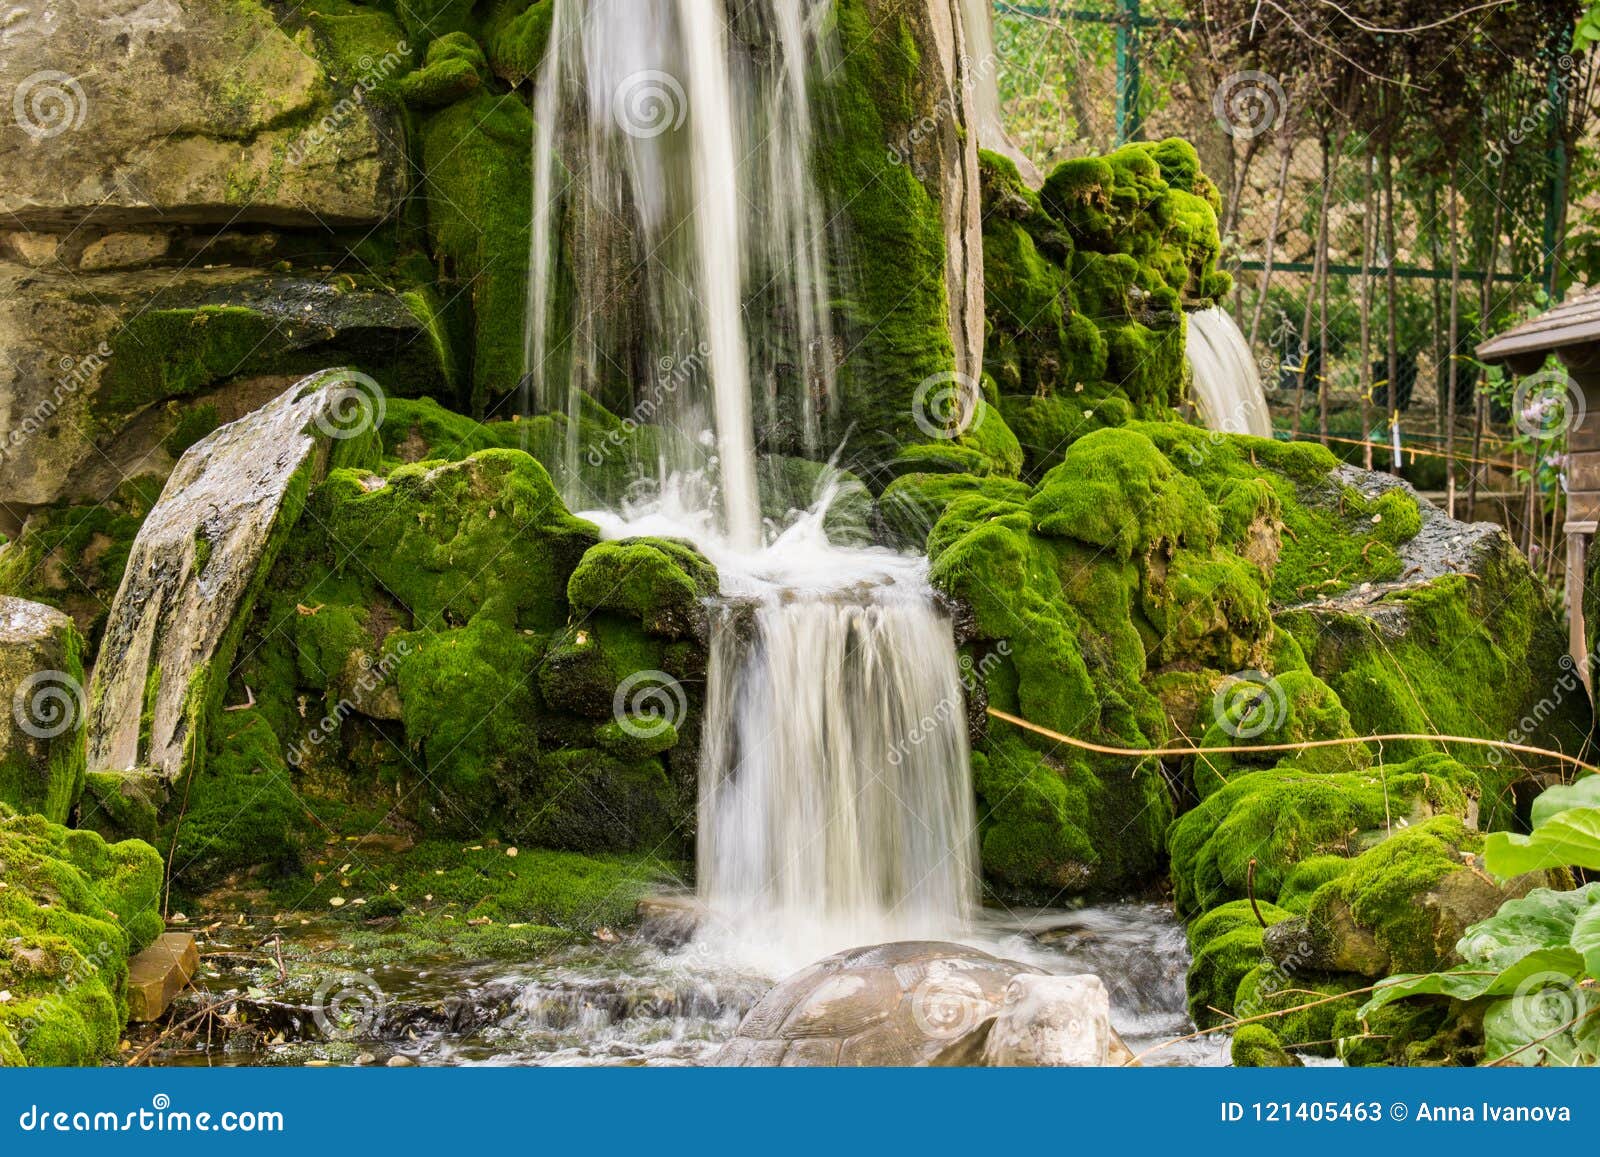 Very Beautiful Waterfalls with Living Water and Growing Moss. Water Flows from Above, Splashes and Drops Around Stock Image - Image of falls, cascade: 121405463